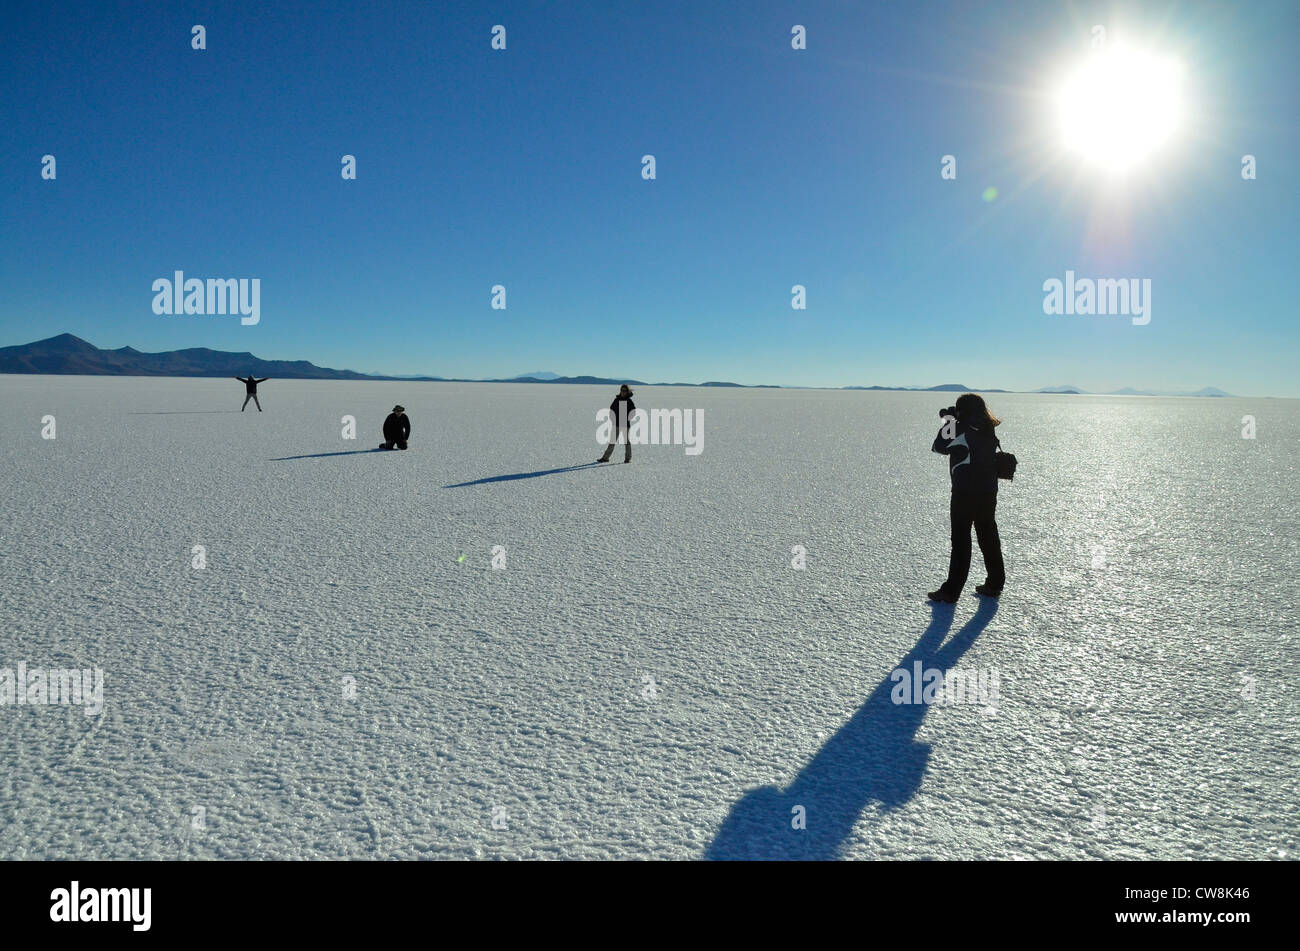 Uyuni Salaar, the biggest salt pan on earth. Andes Altiplano plateau of Bolivia. Altitude about 4000m. Stock Photo